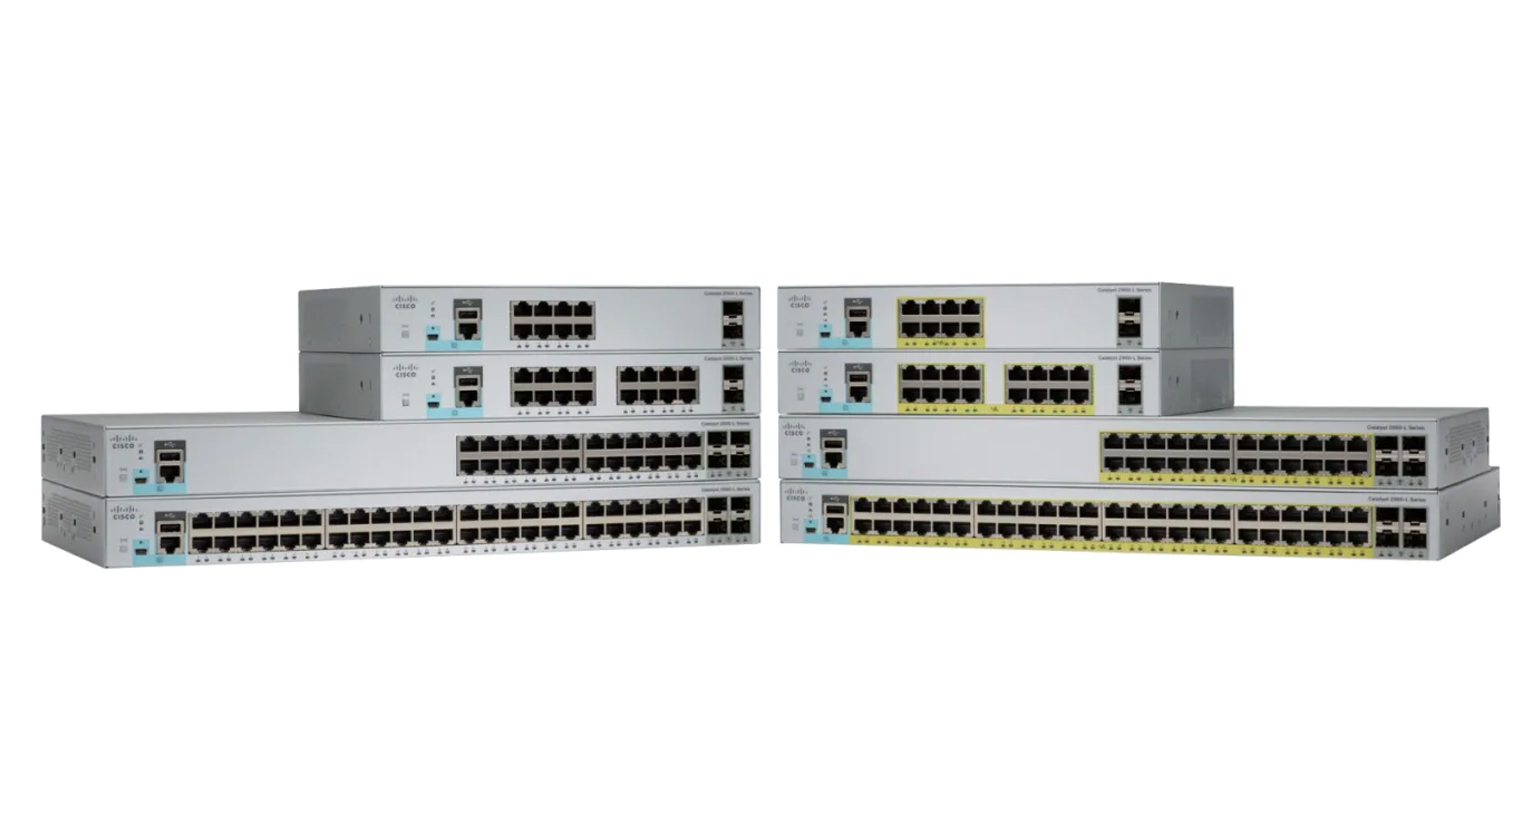 refurbished-and-used-catalyst-2960-L-switch-series-mumbai